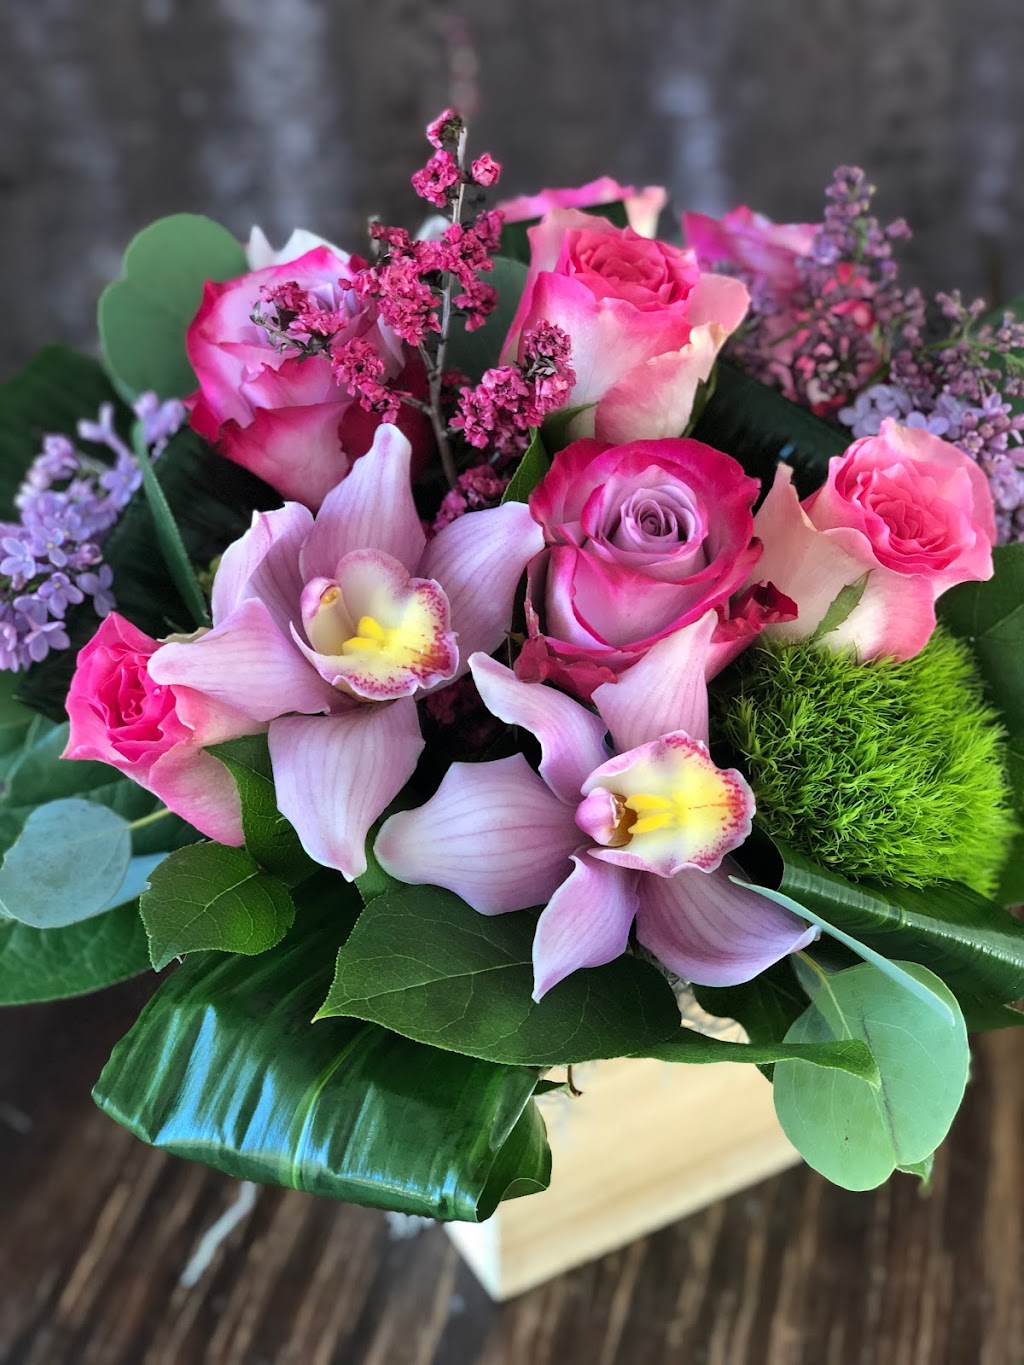 Claires Flowers - Santa Clarita Flower Delivery | 27019 Santa Clarita Rd, Santa Clarita, CA 91350, USA | Phone: (661) 297-4023